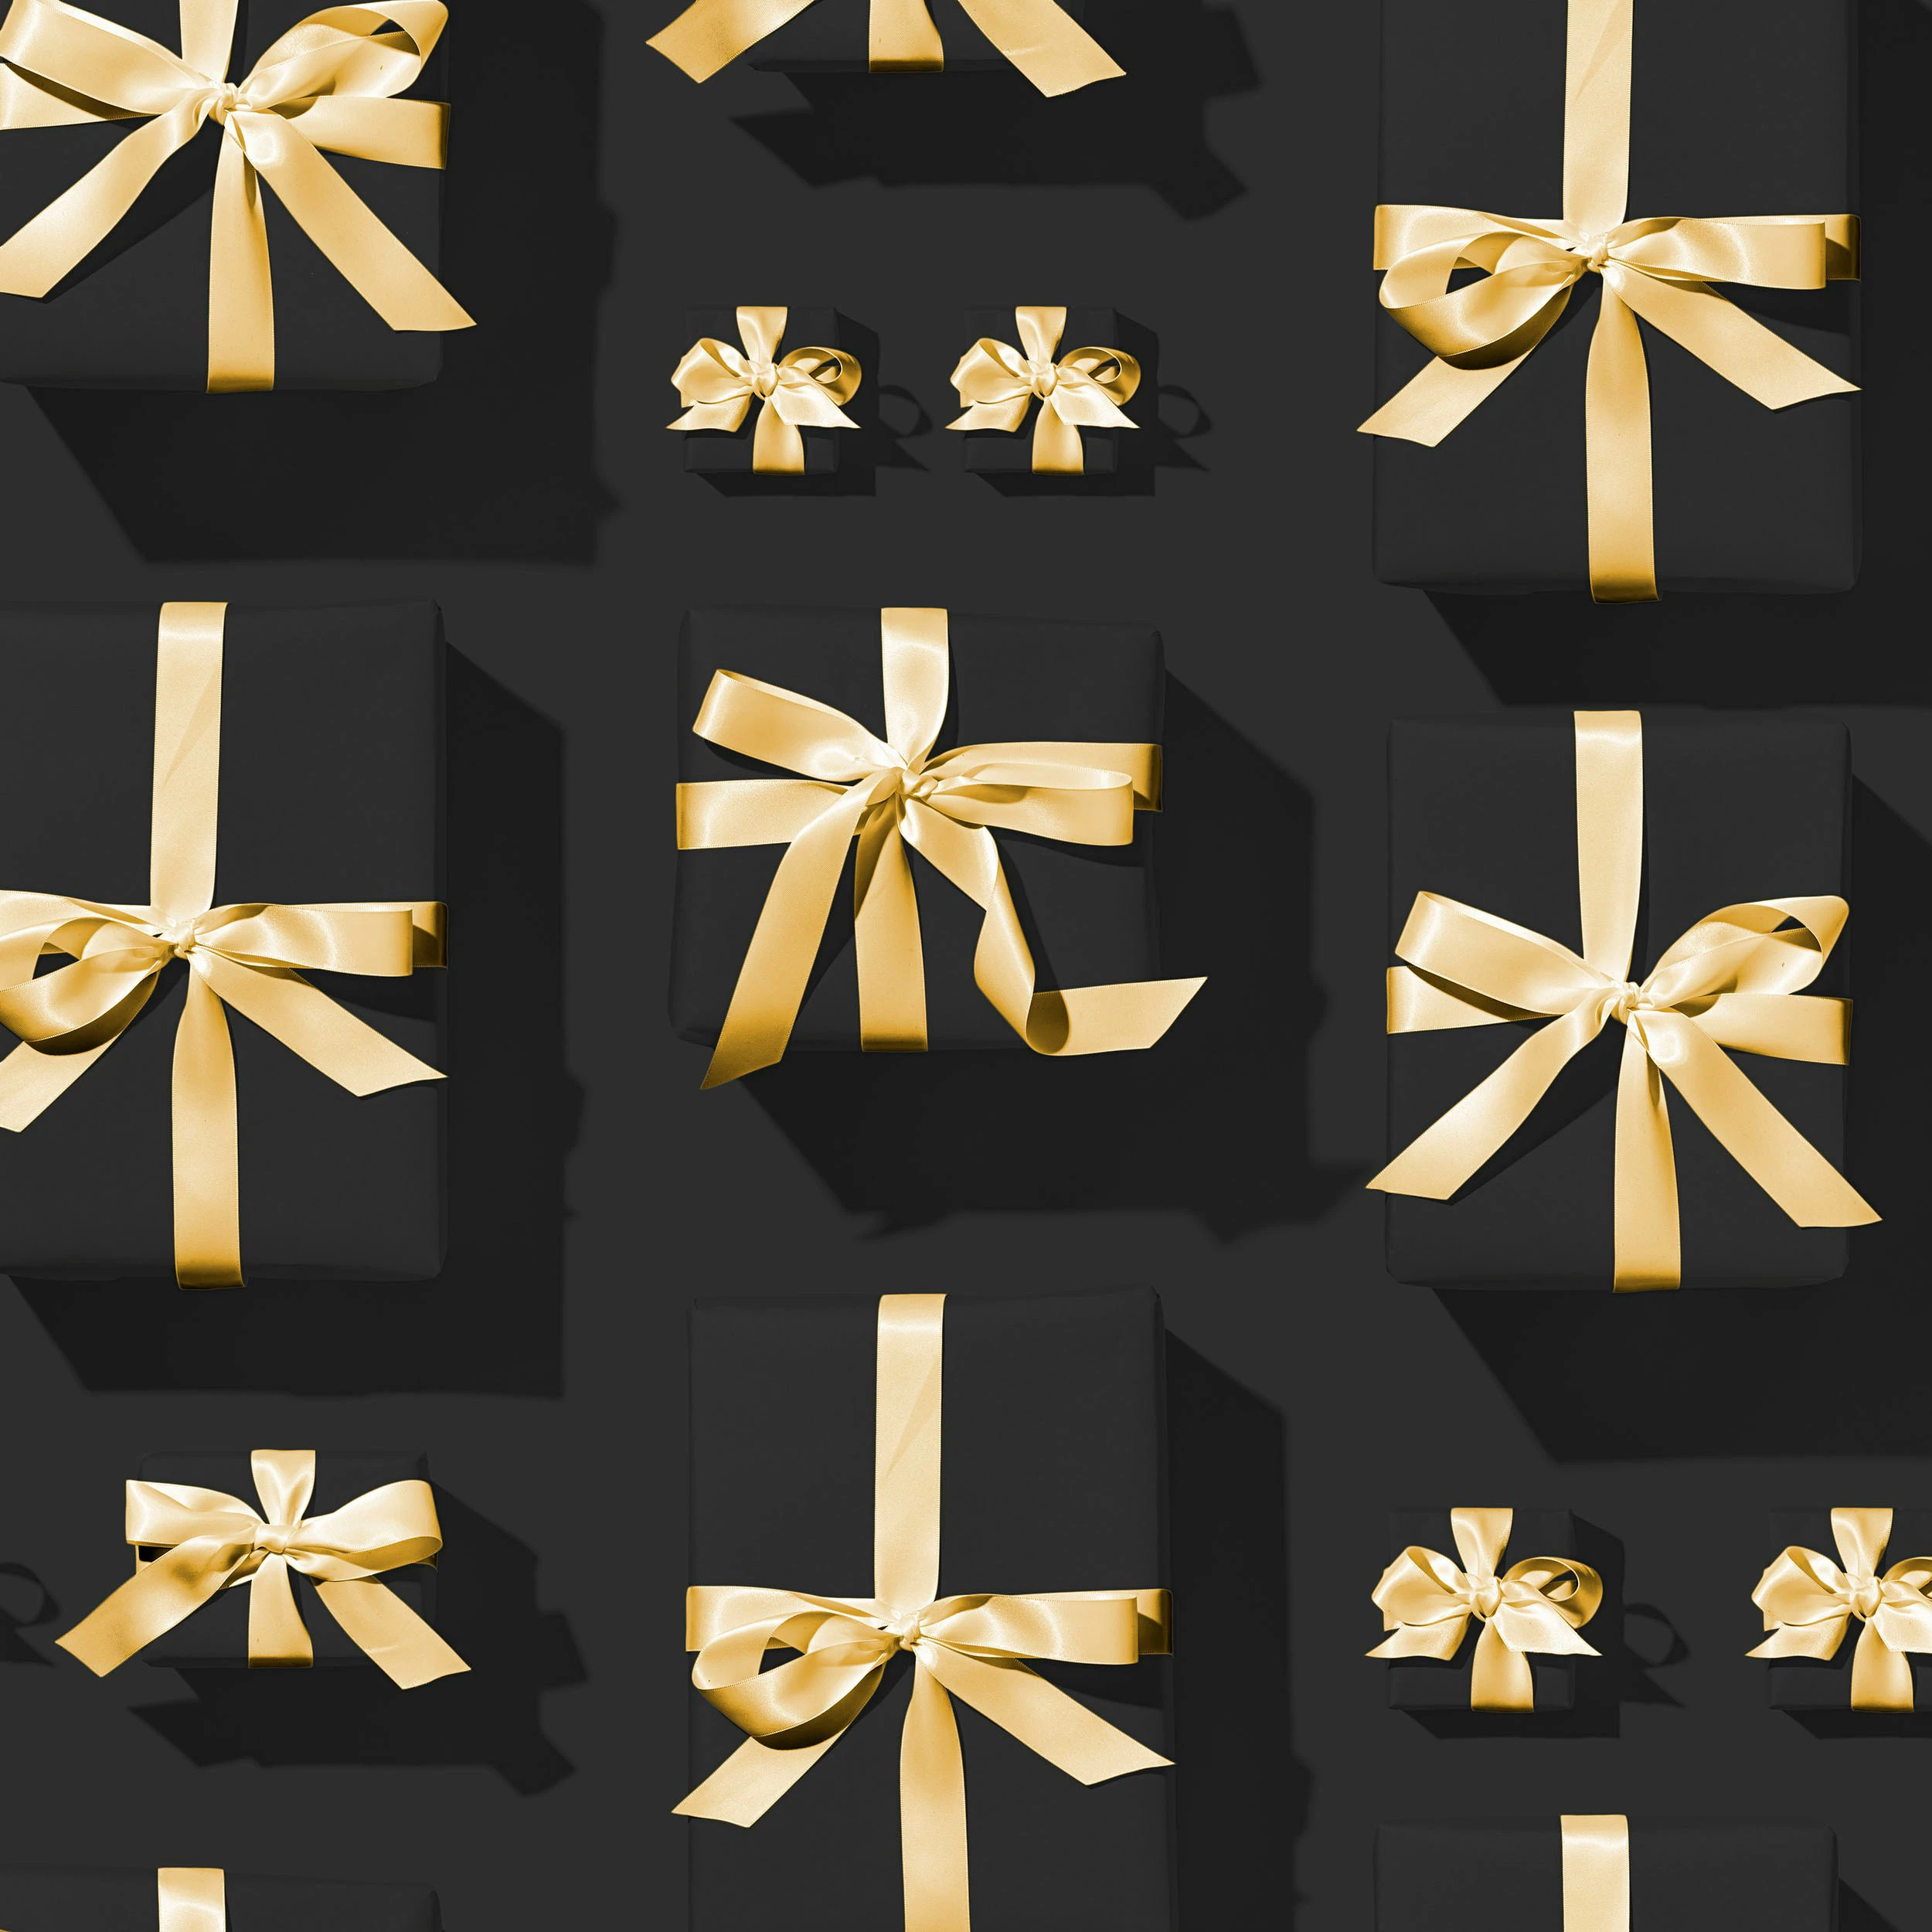 Gifts on black background wrapped in black paper and gold ribbons